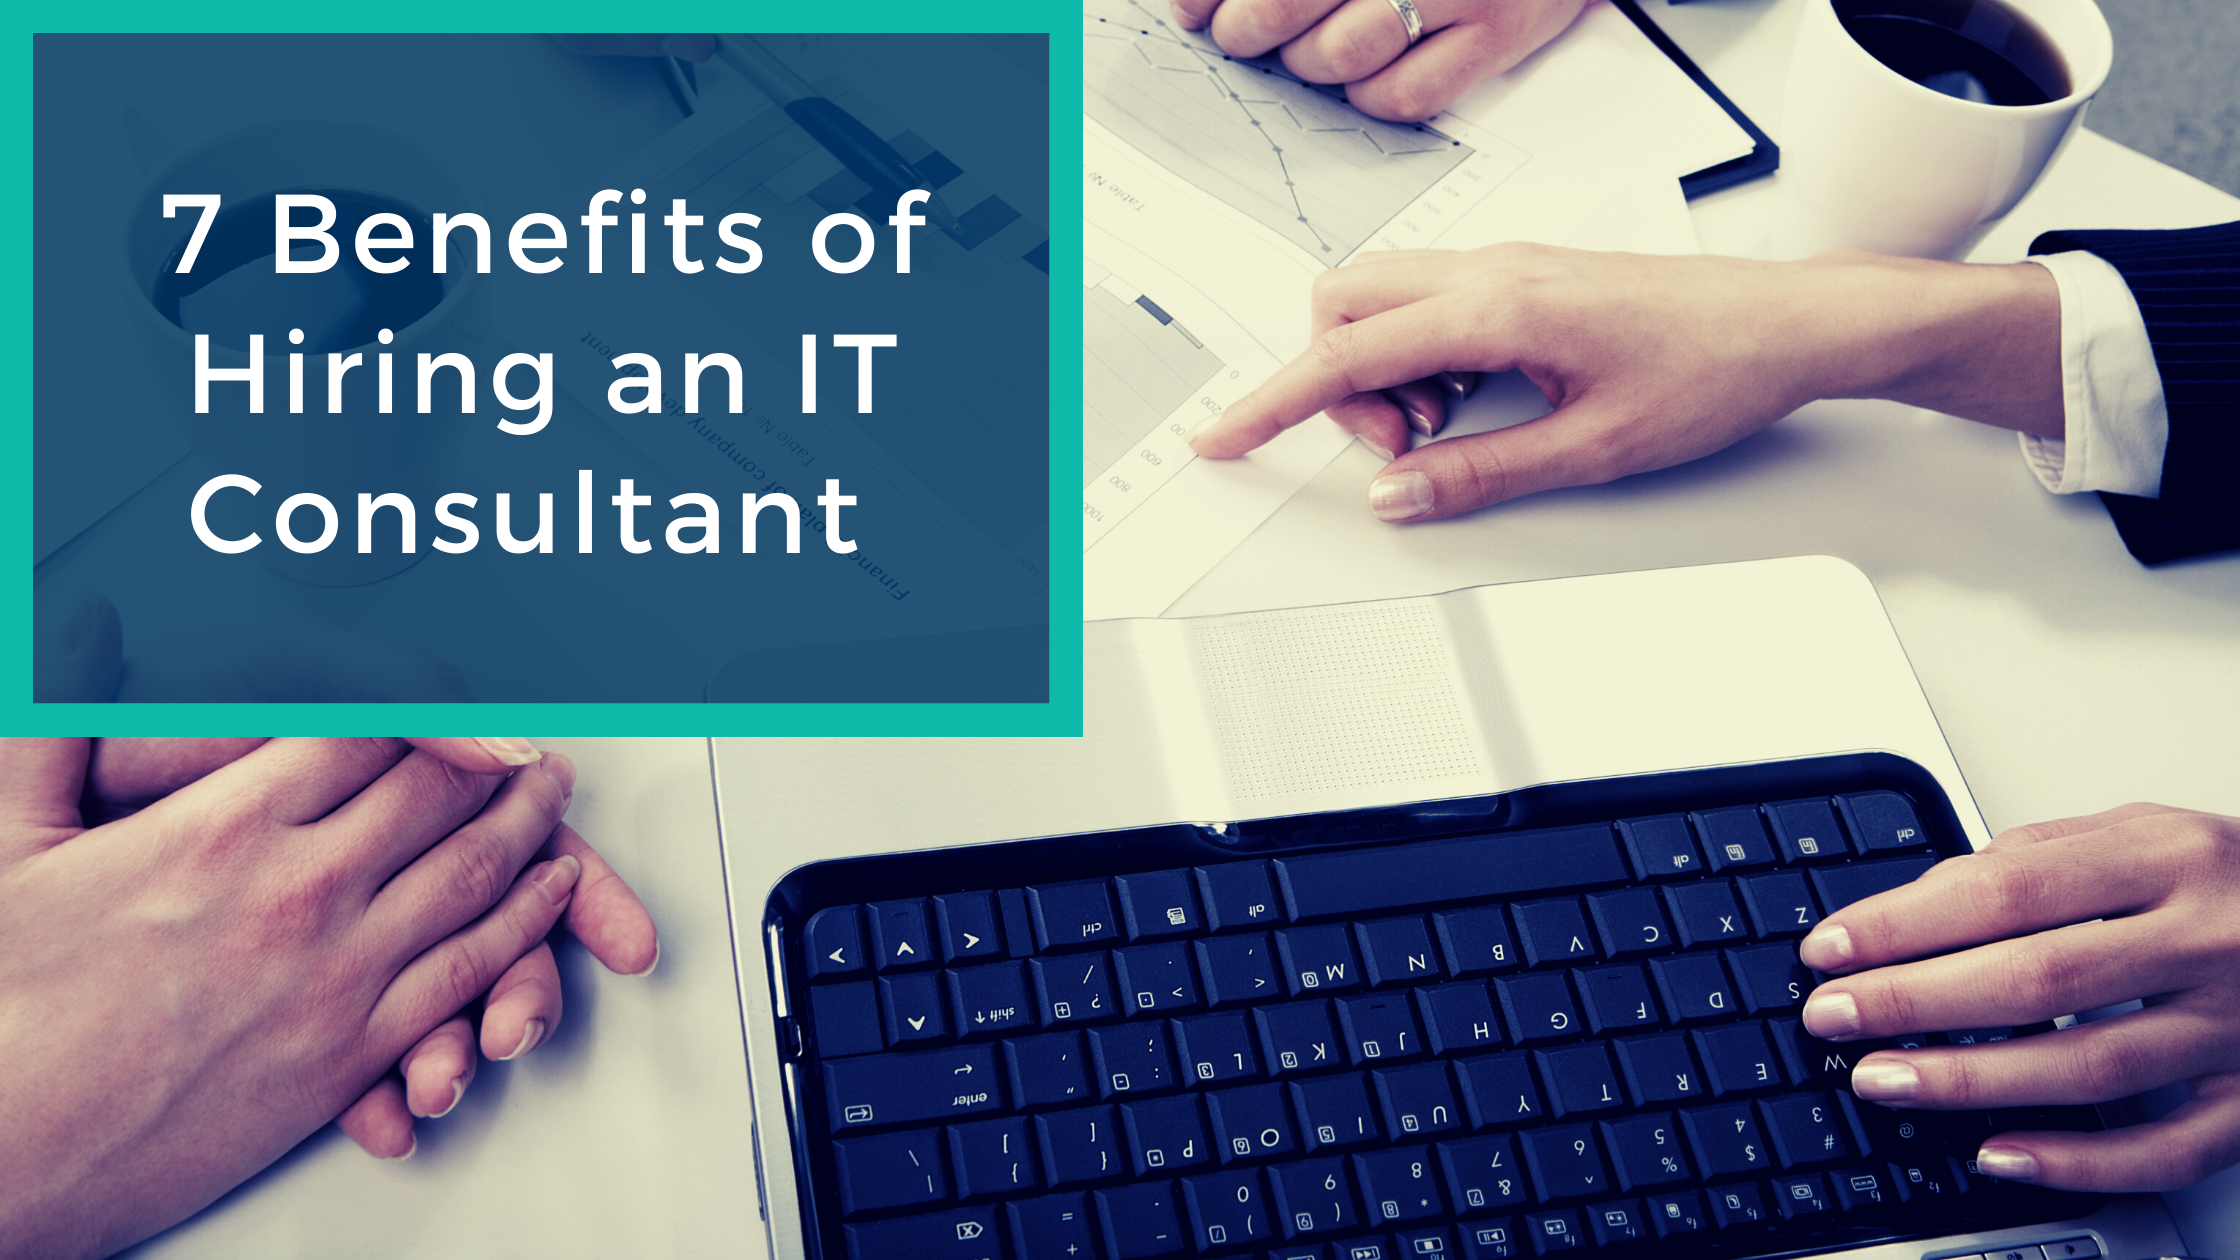 7 Benefits of Hiring and IT Consultant